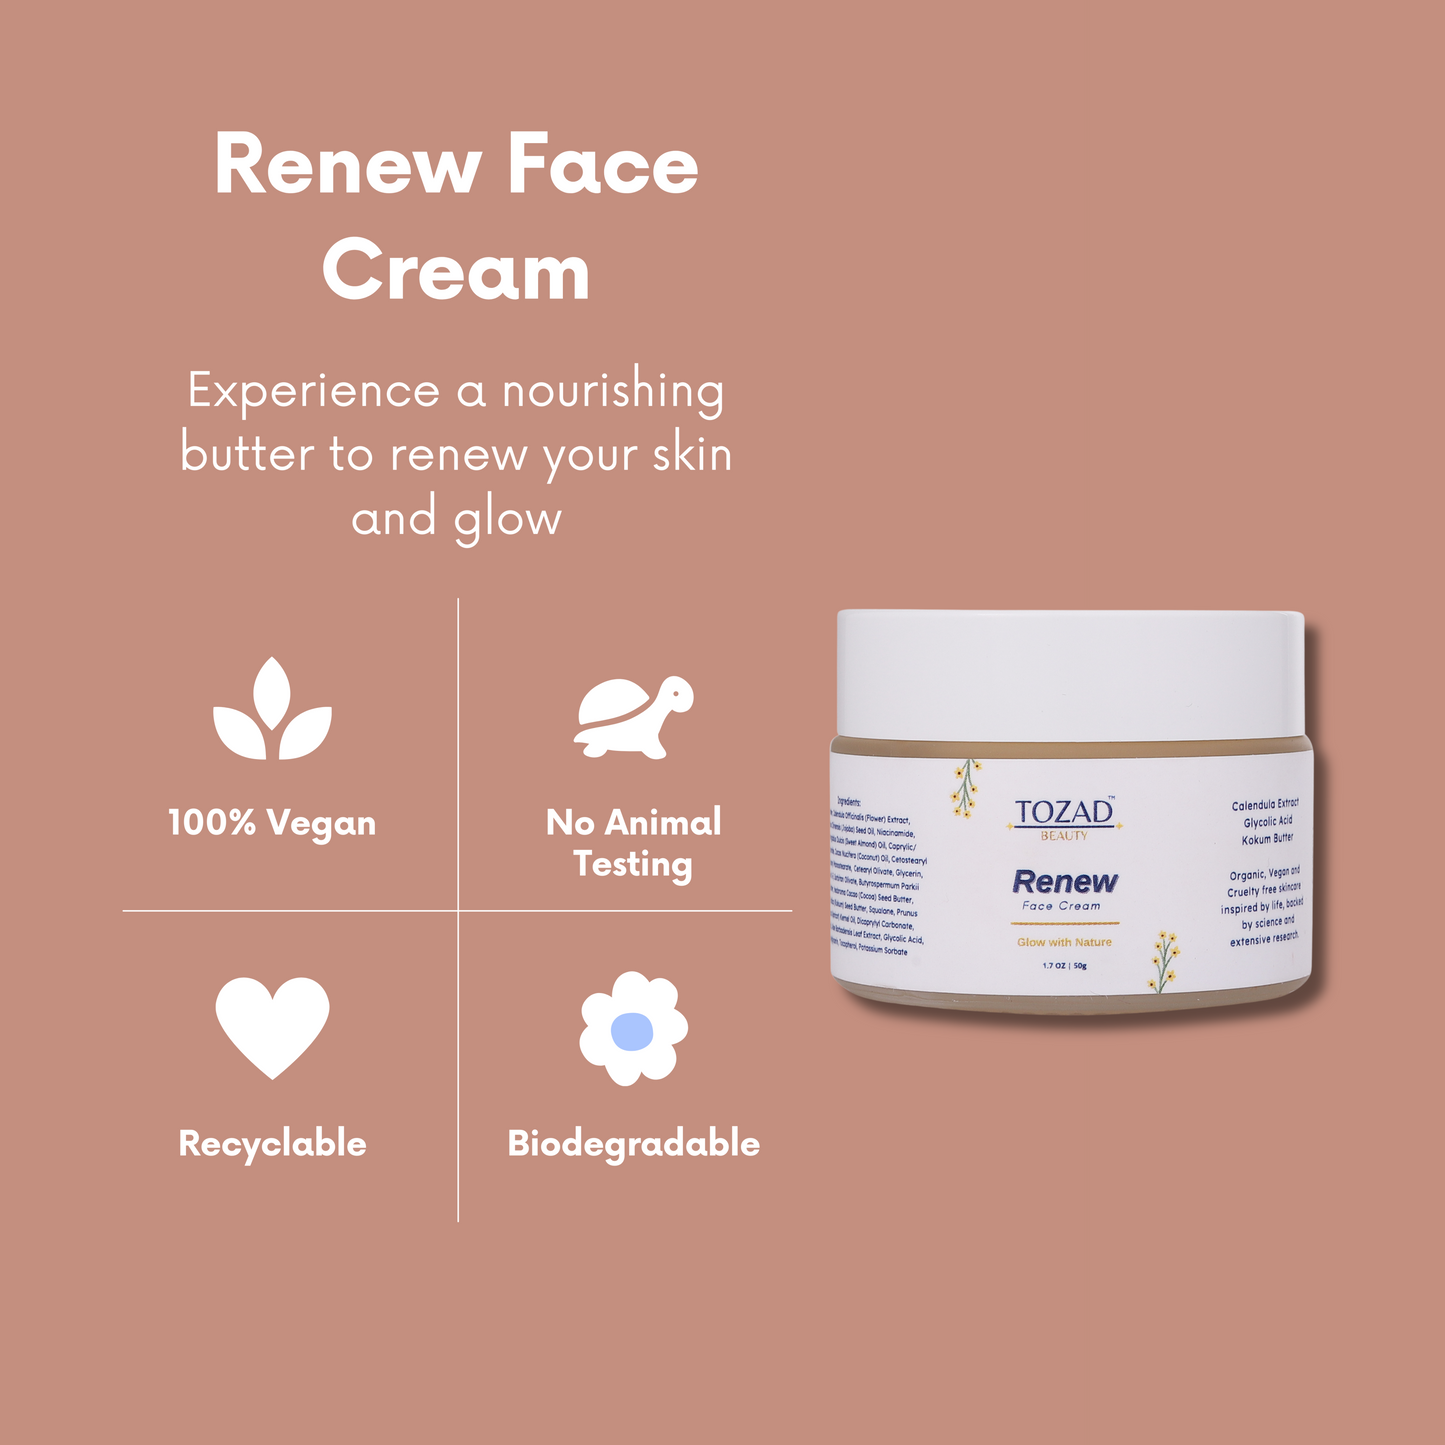 Renew Face Cream with Calendula, Glycolic Acid, Kokum Butter, Cocoa Butter, Aloe Butter, Apricot Oil